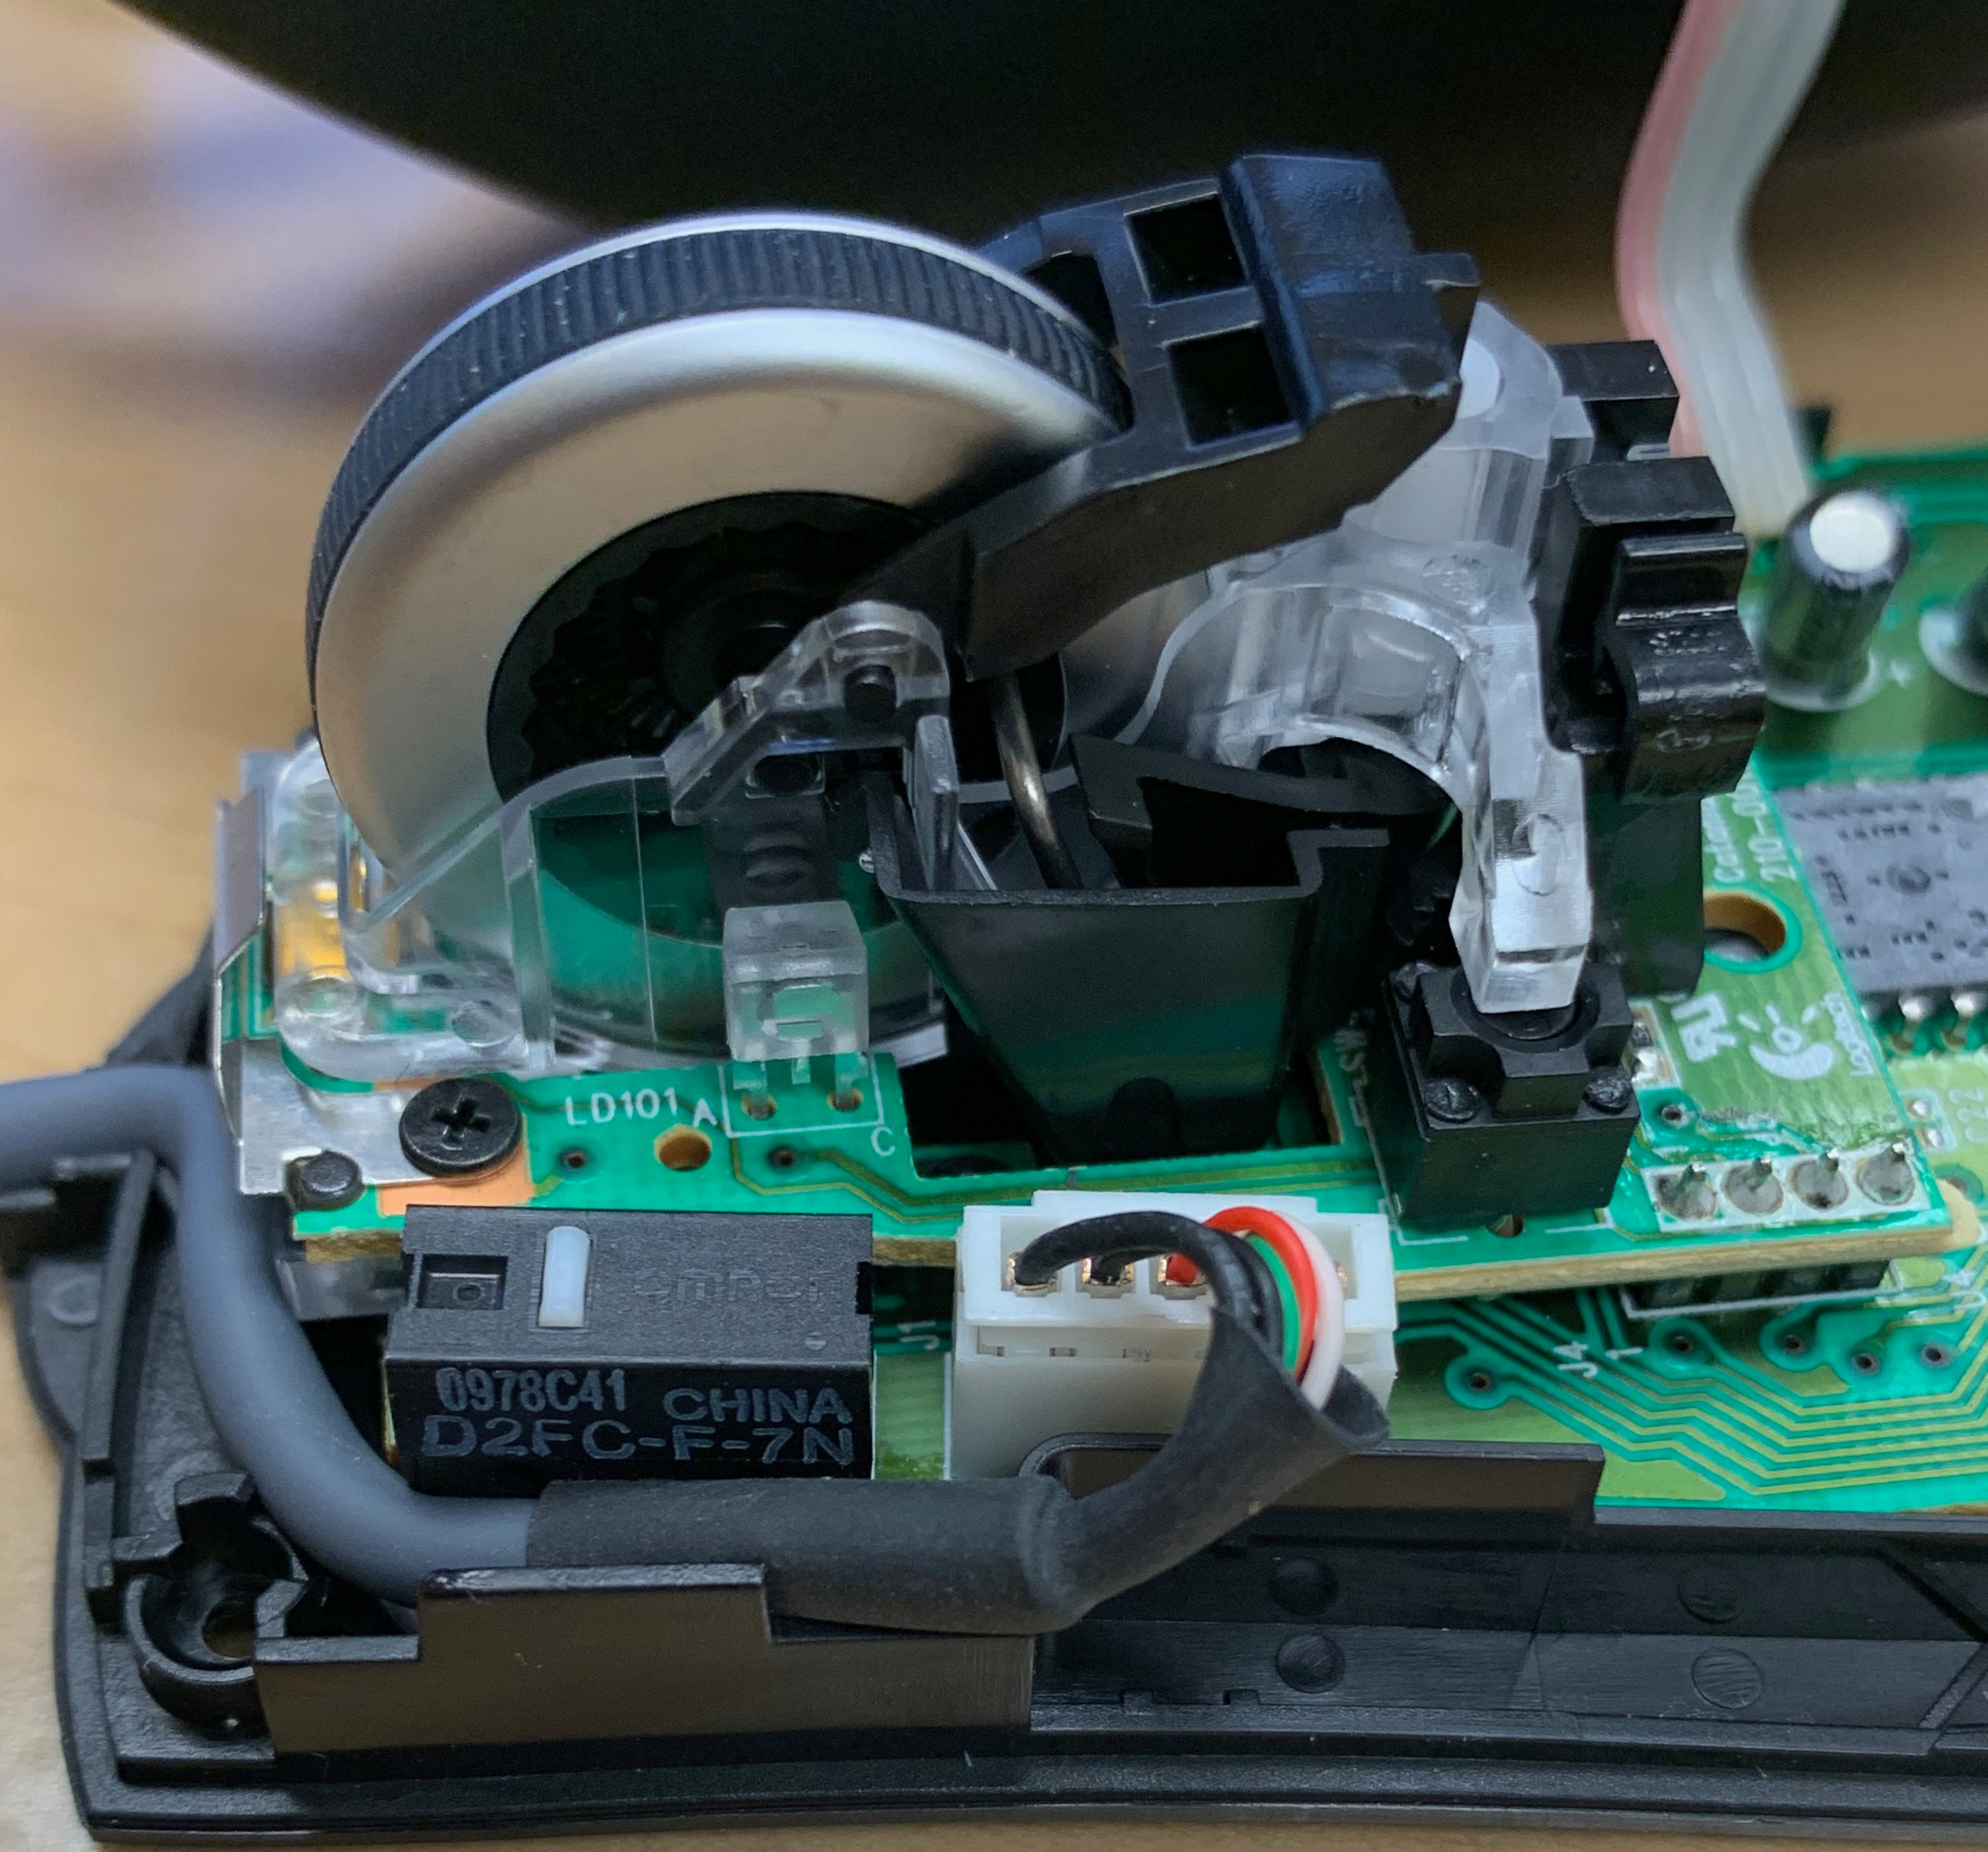 Repair A Mouse With Broken Cable - Webcommand.net